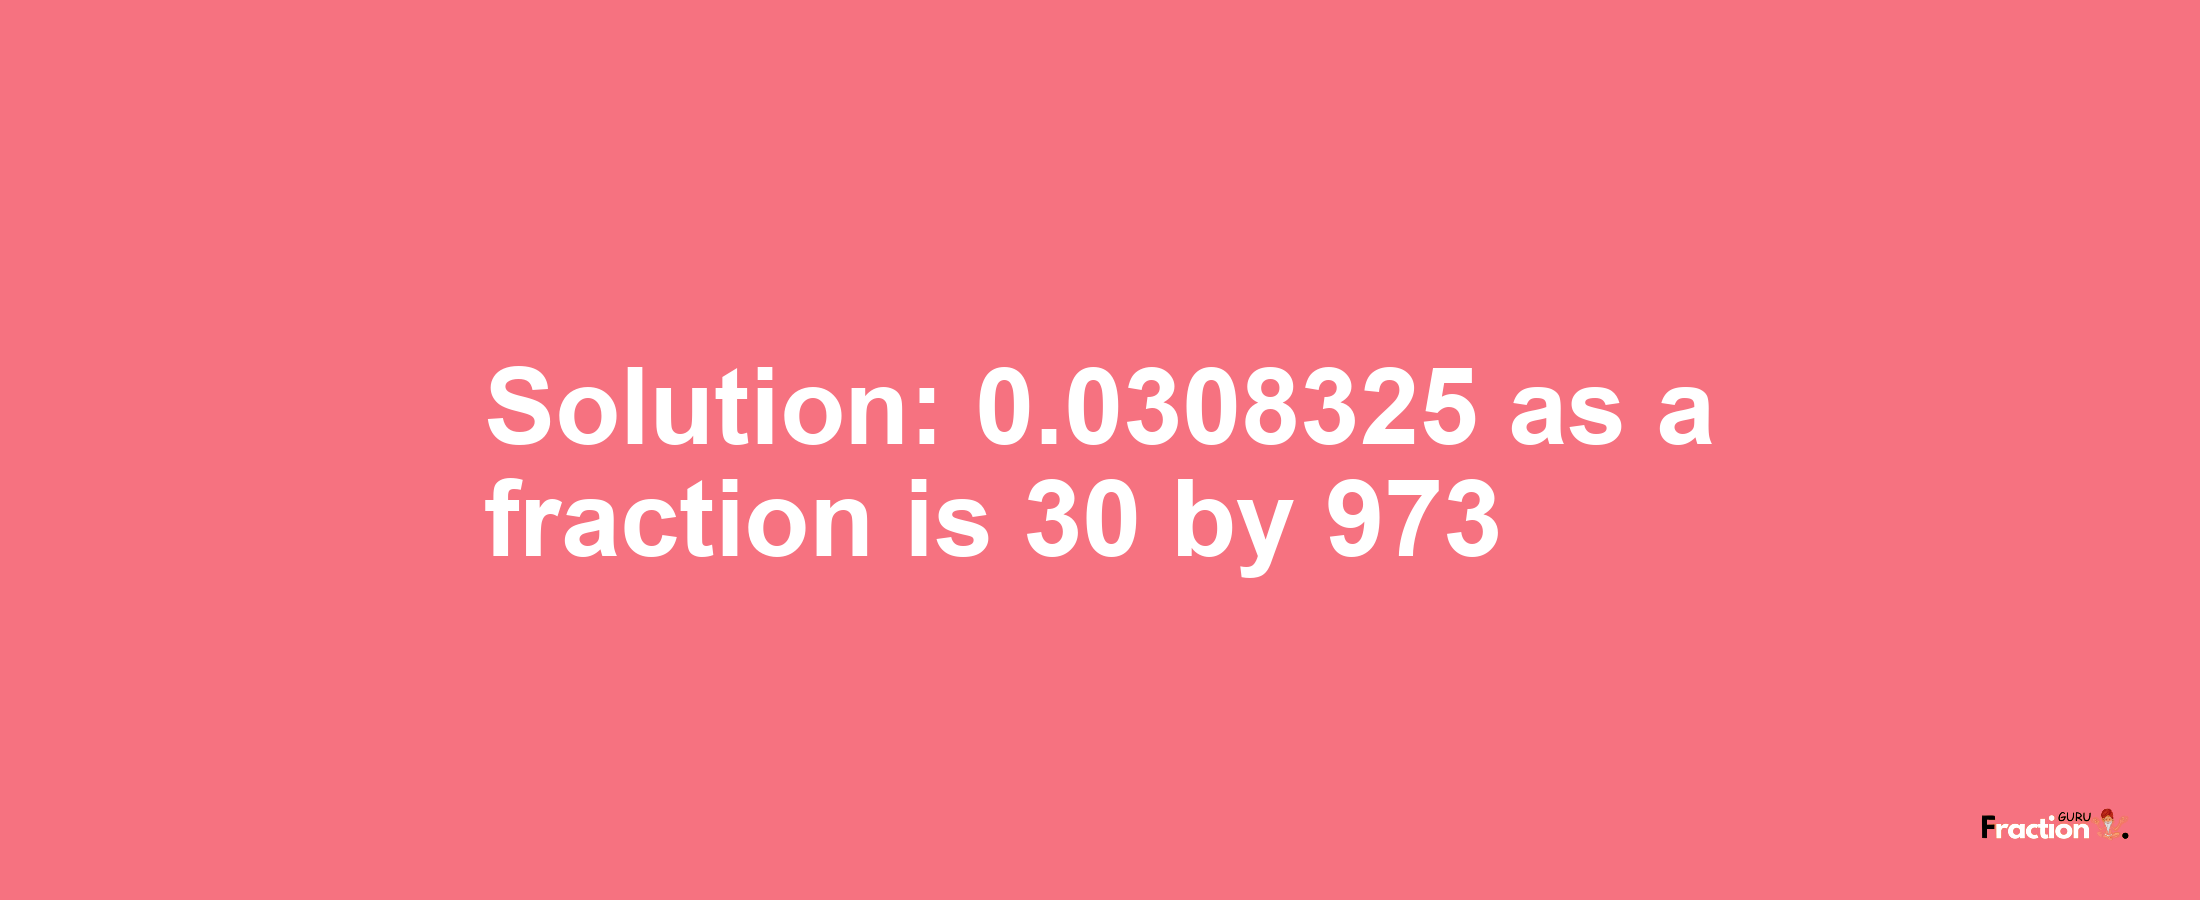 Solution:0.0308325 as a fraction is 30/973